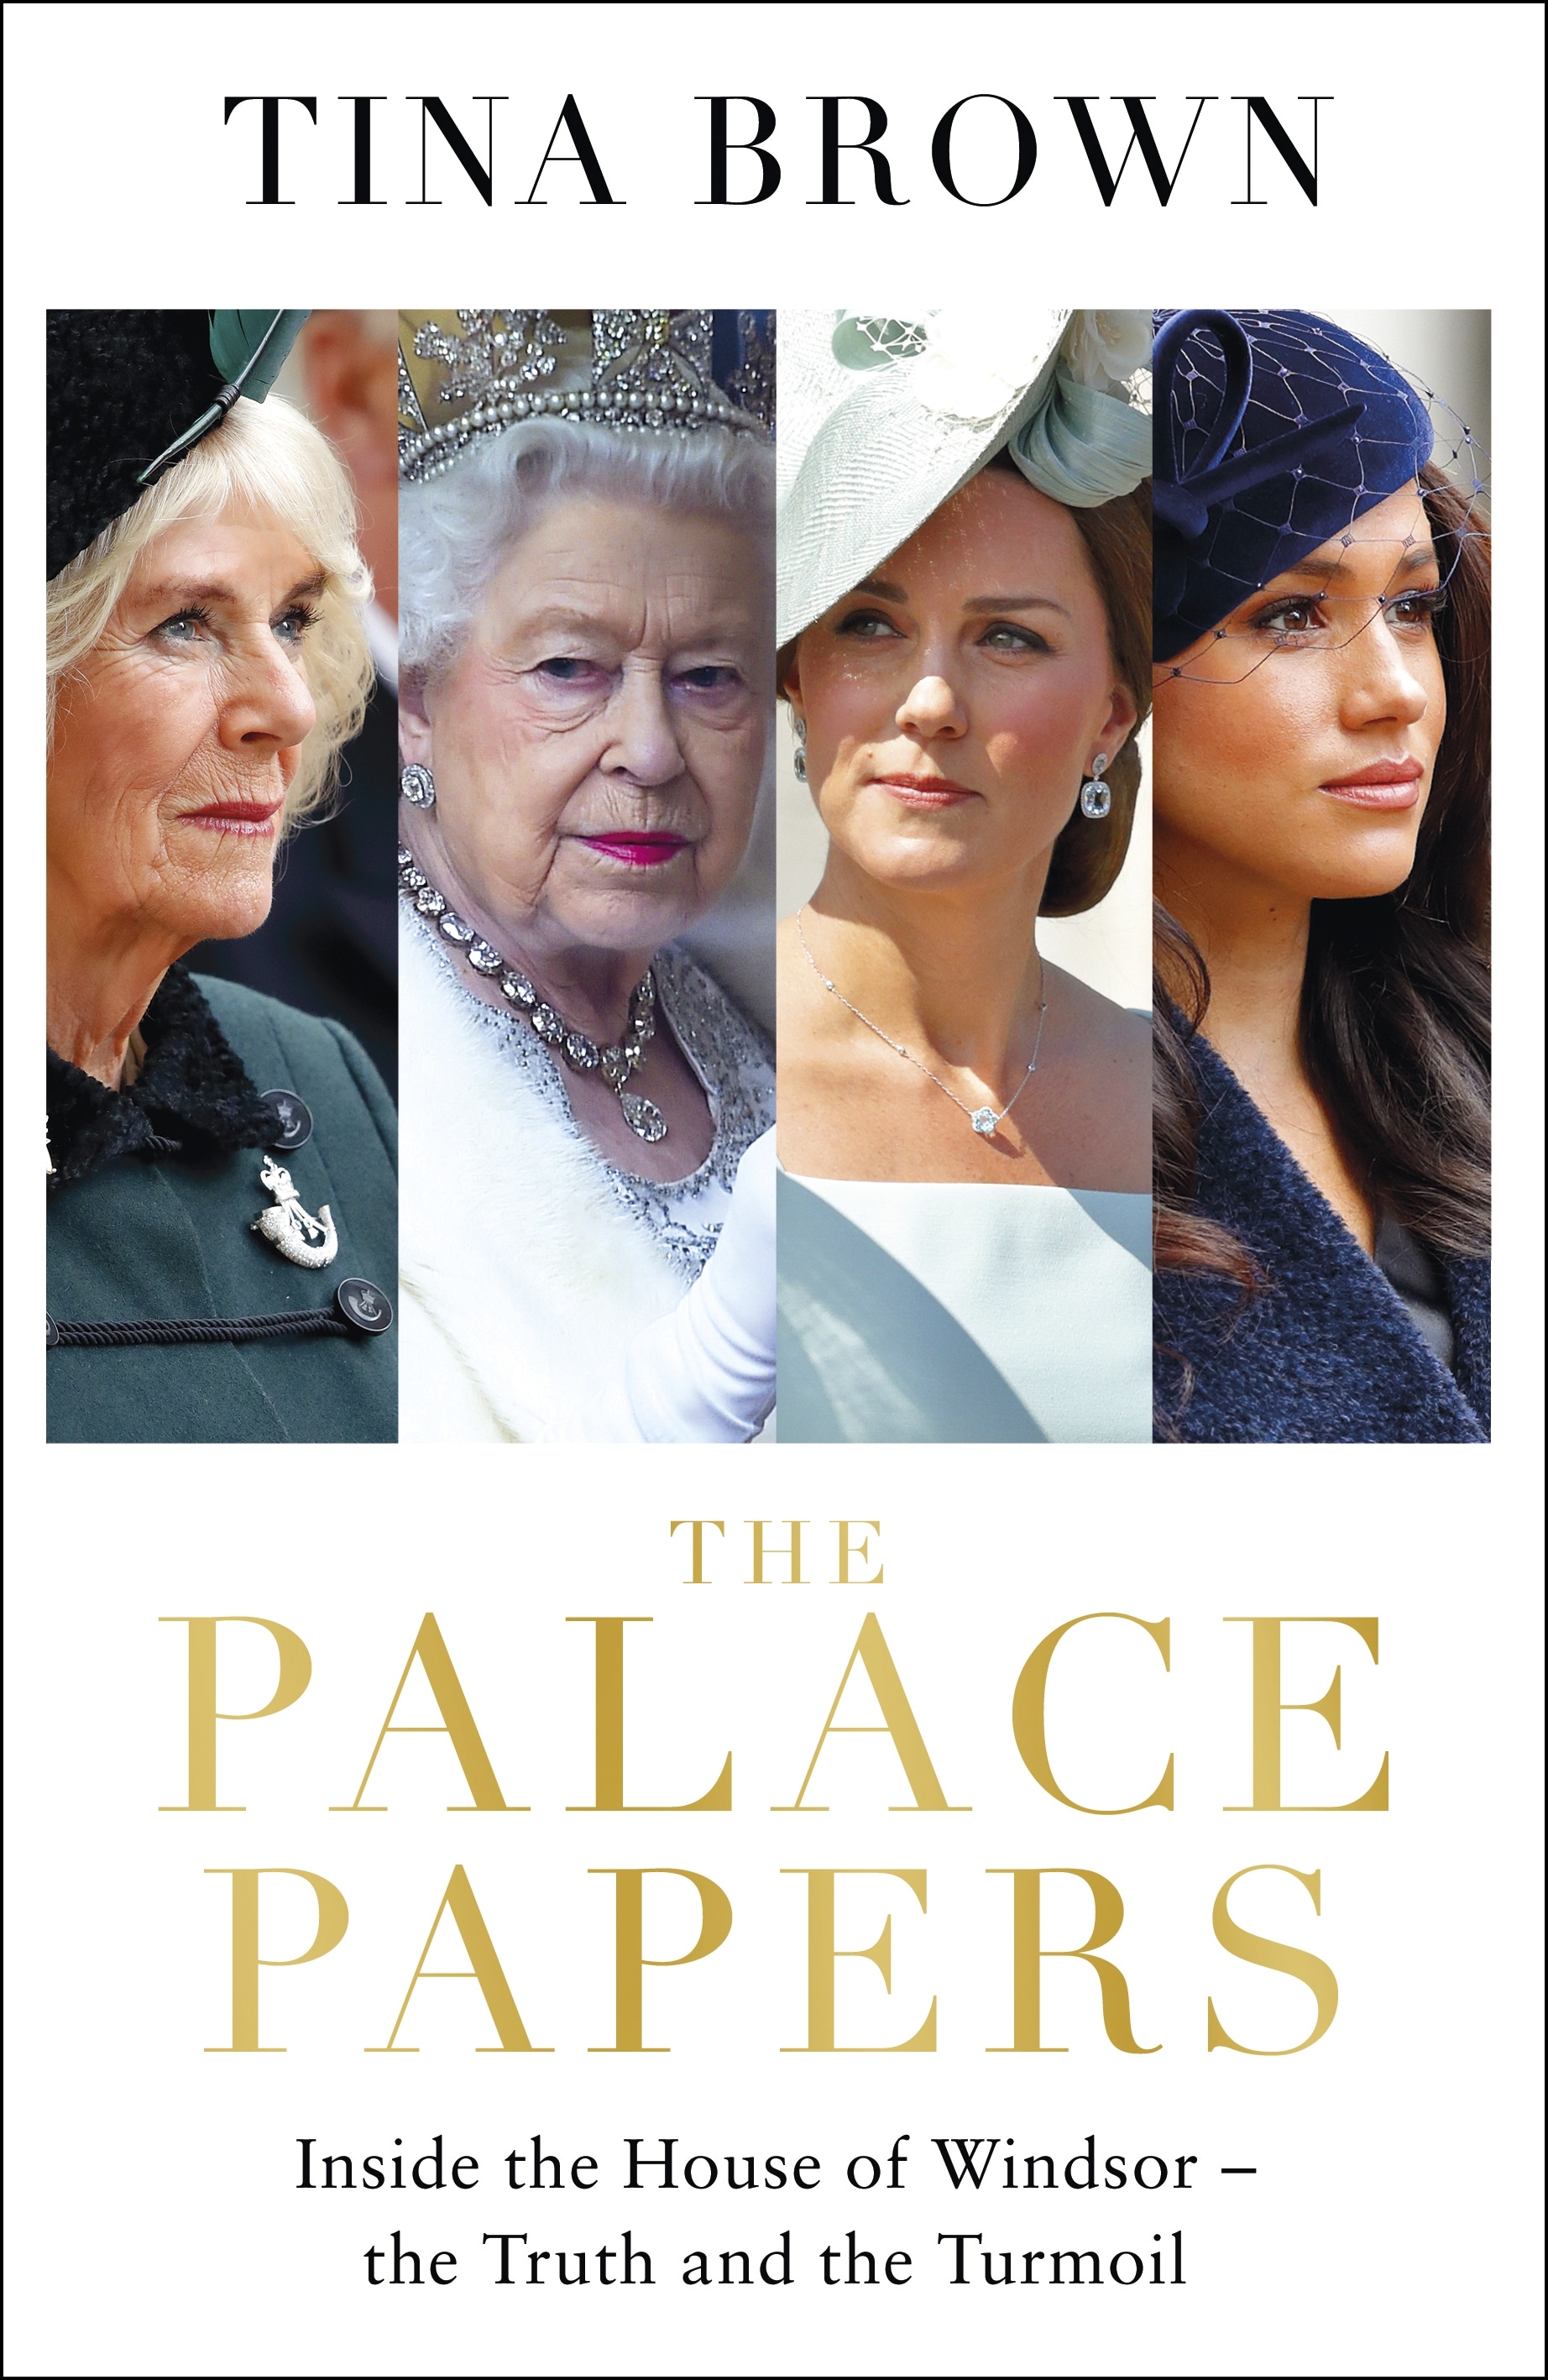 Book “The Palace Papers” by Tina Brown — February 2, 2023